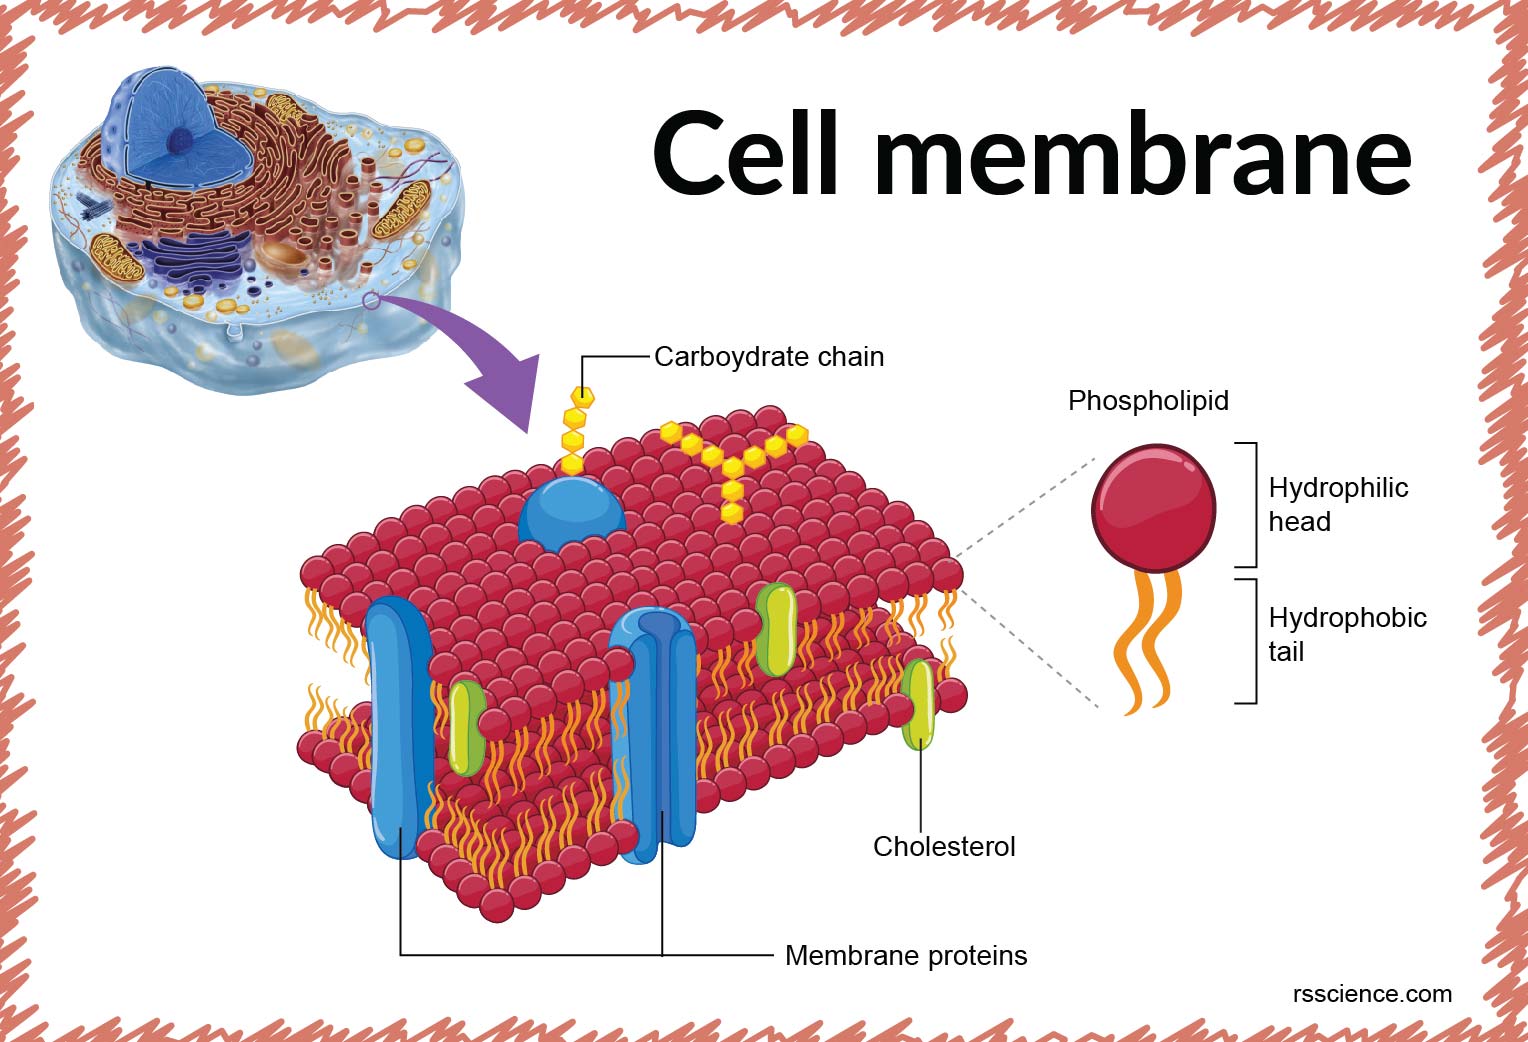 Cell membrane - definition, structure, function, and biology